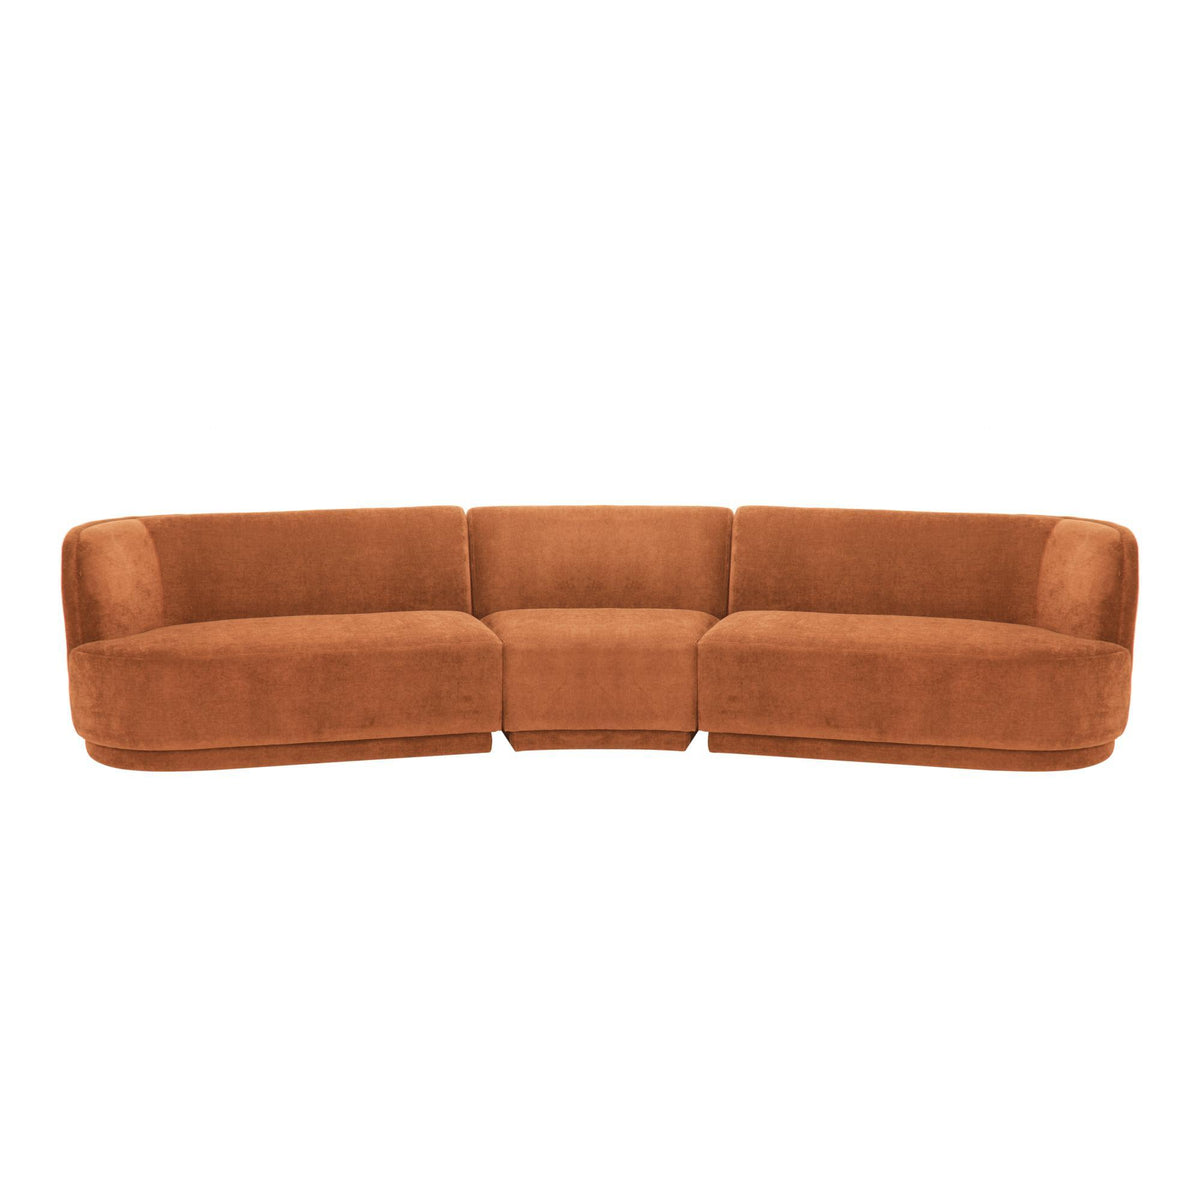 Moe's Home Collection Yoon Compass Modular Sectional Fired Rust - JM-1021-06